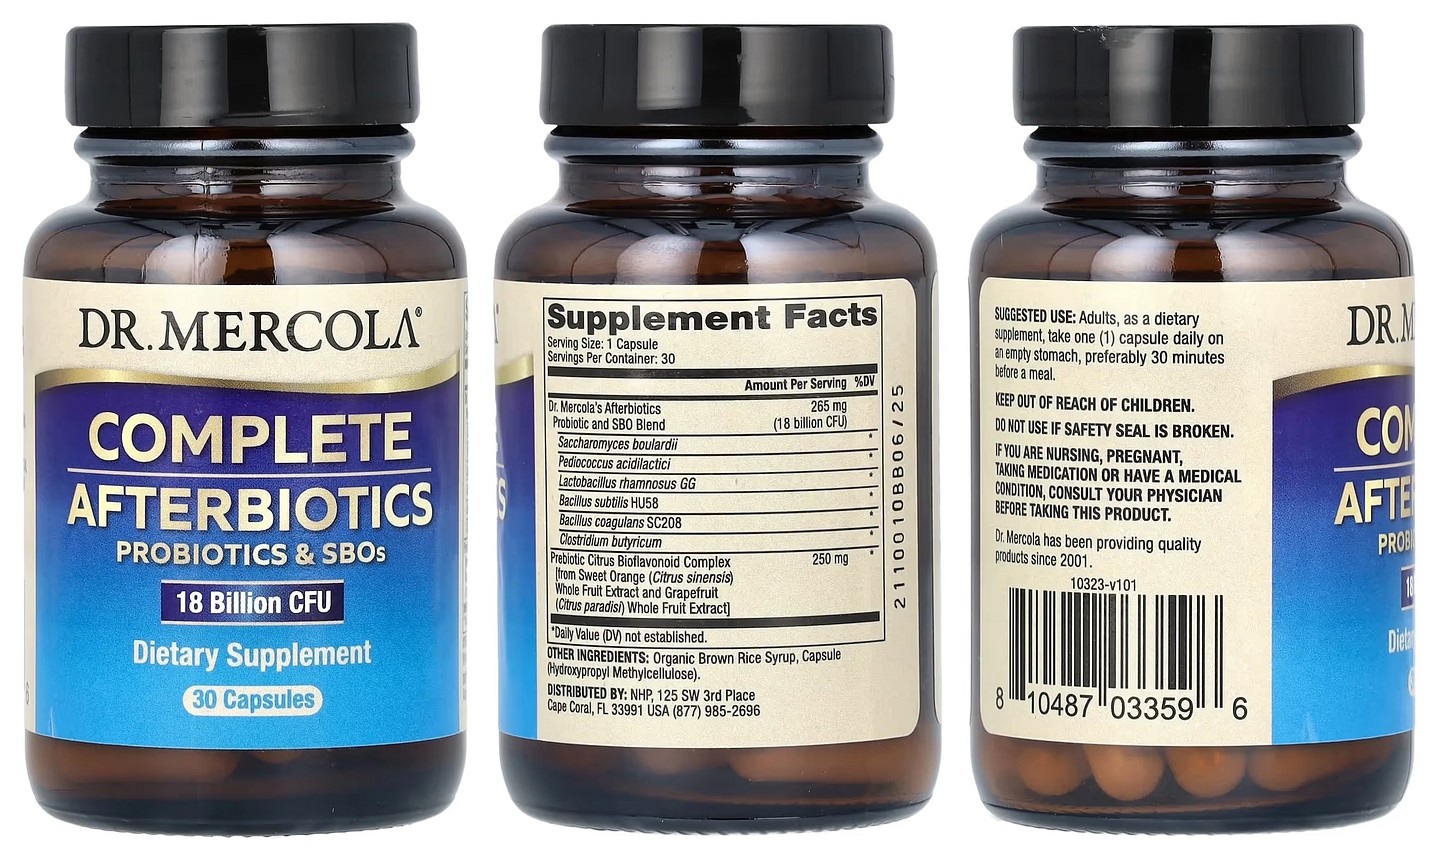 Dr. Mercola, Complete Afterbiotics packaging